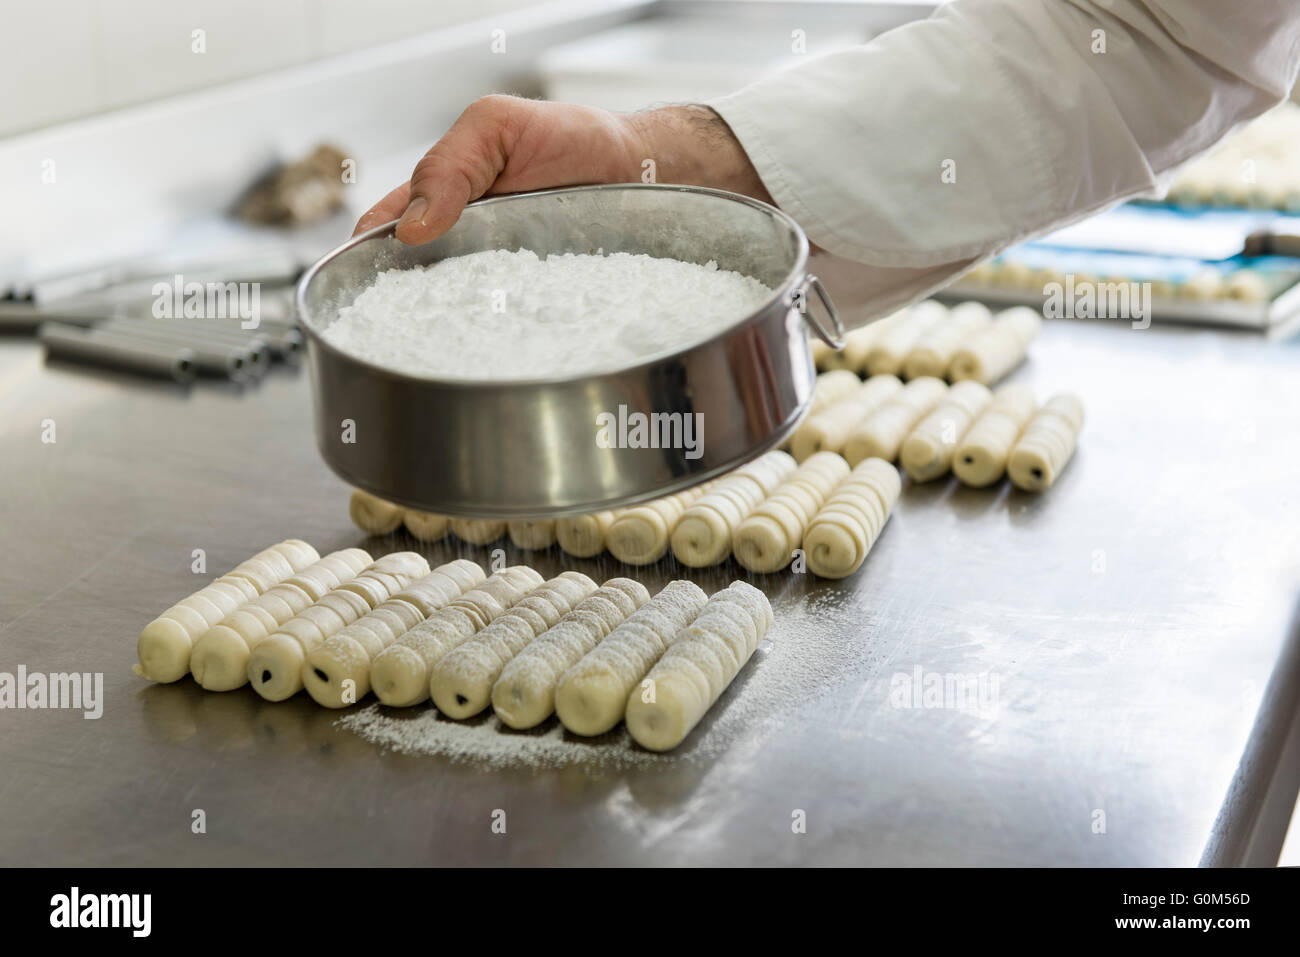 pastry chef covering the dough with powdered sugar Stock Photo